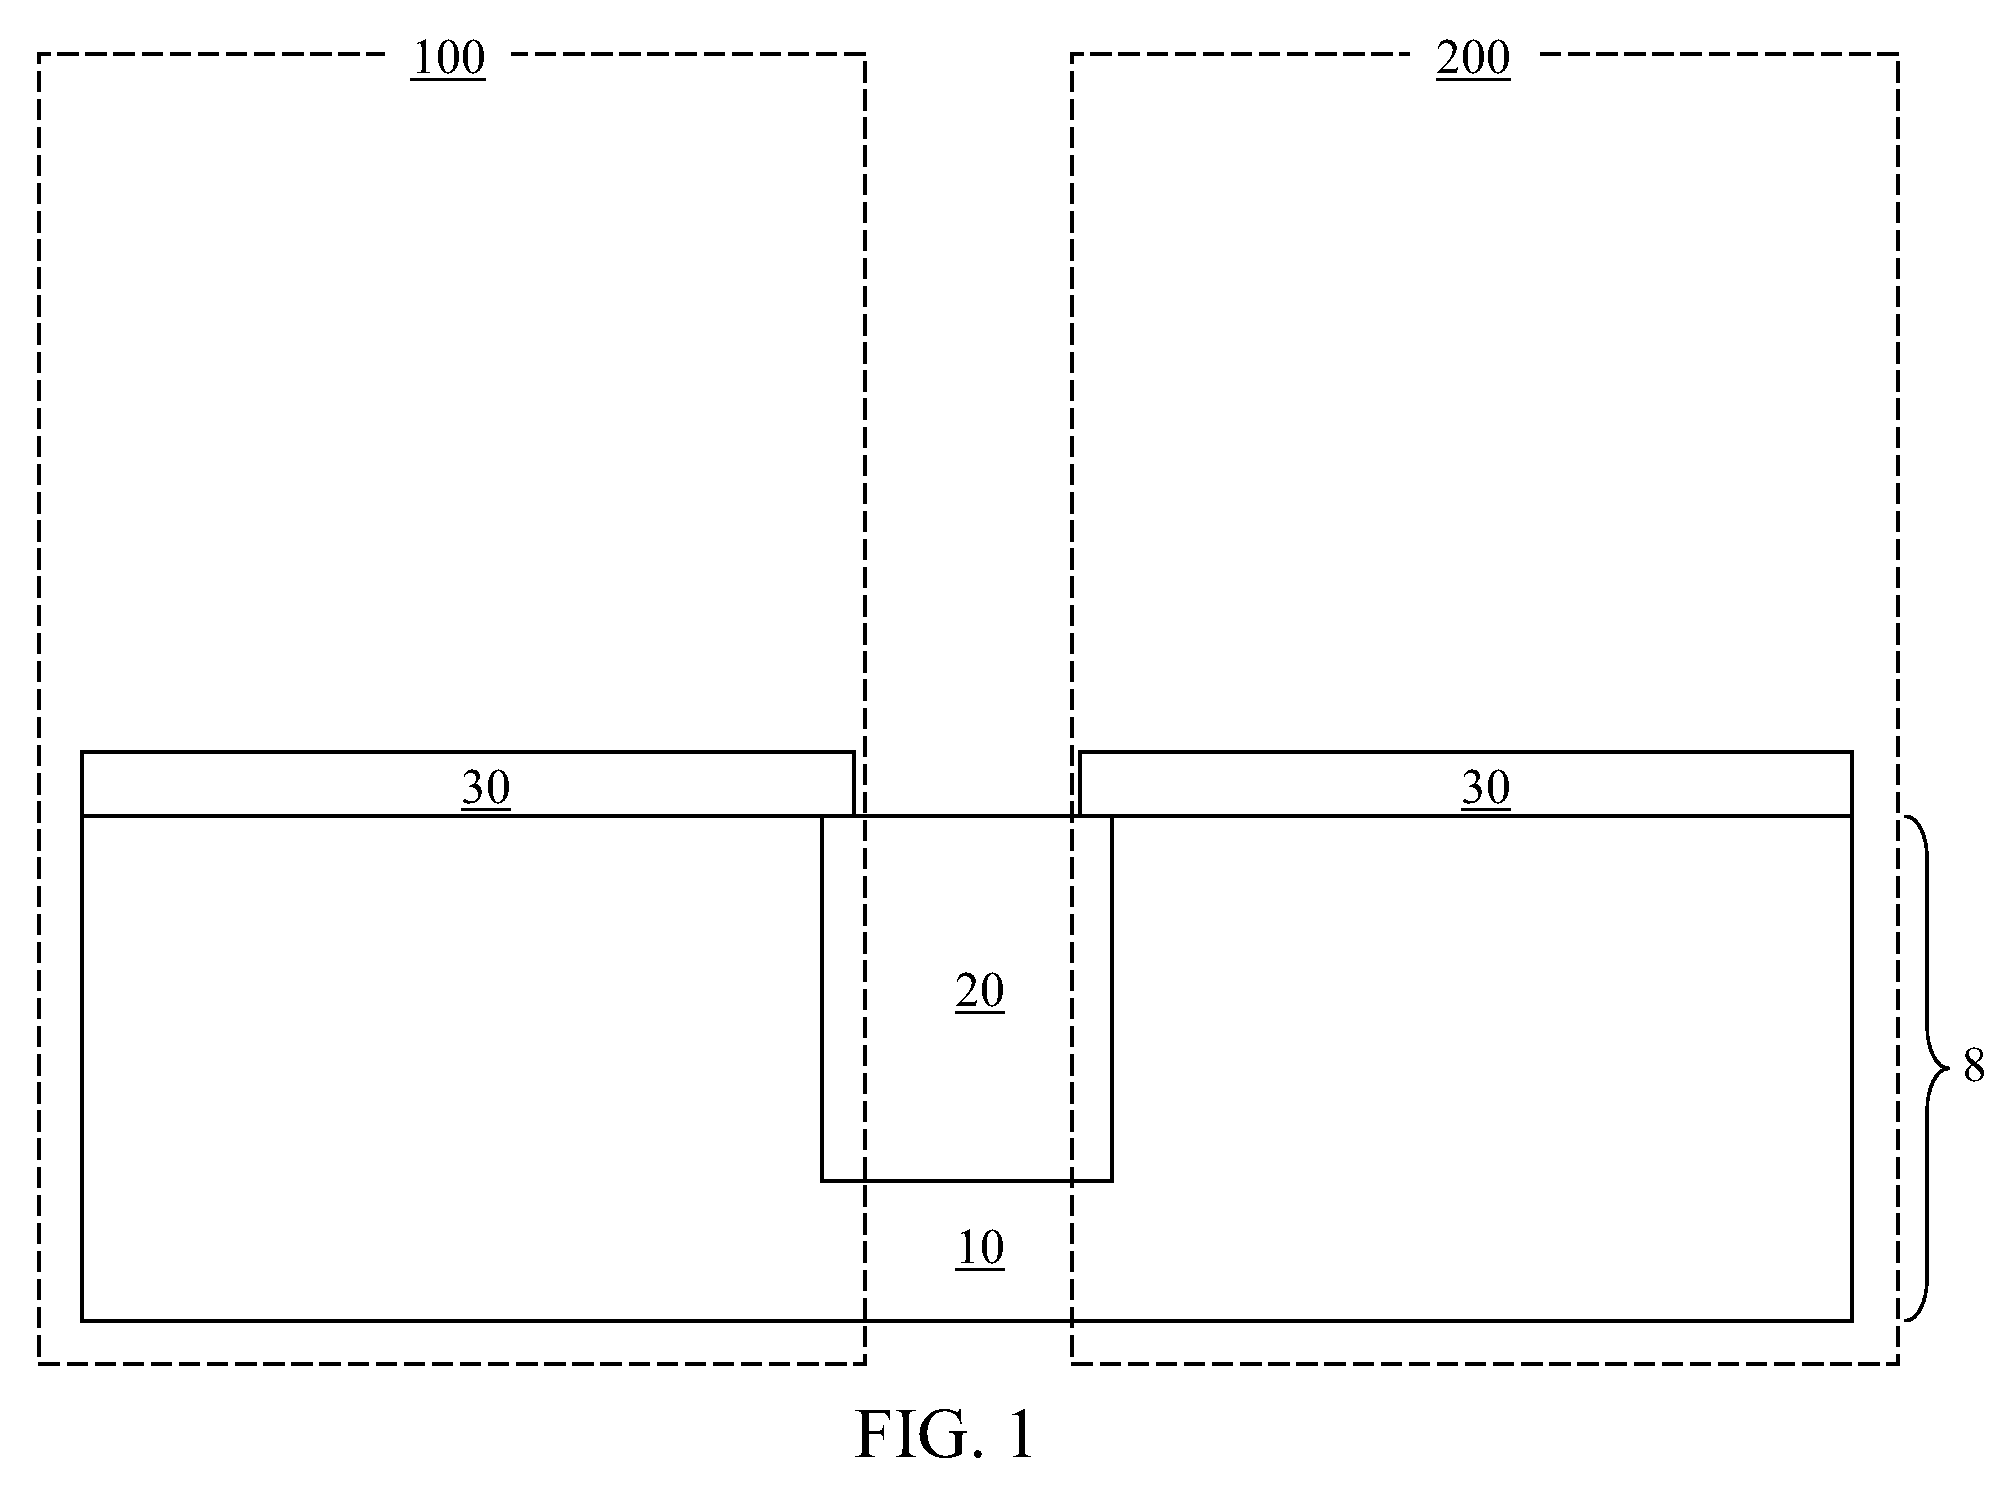 Metal gate stack and semiconductor gate stack for CMOS devices